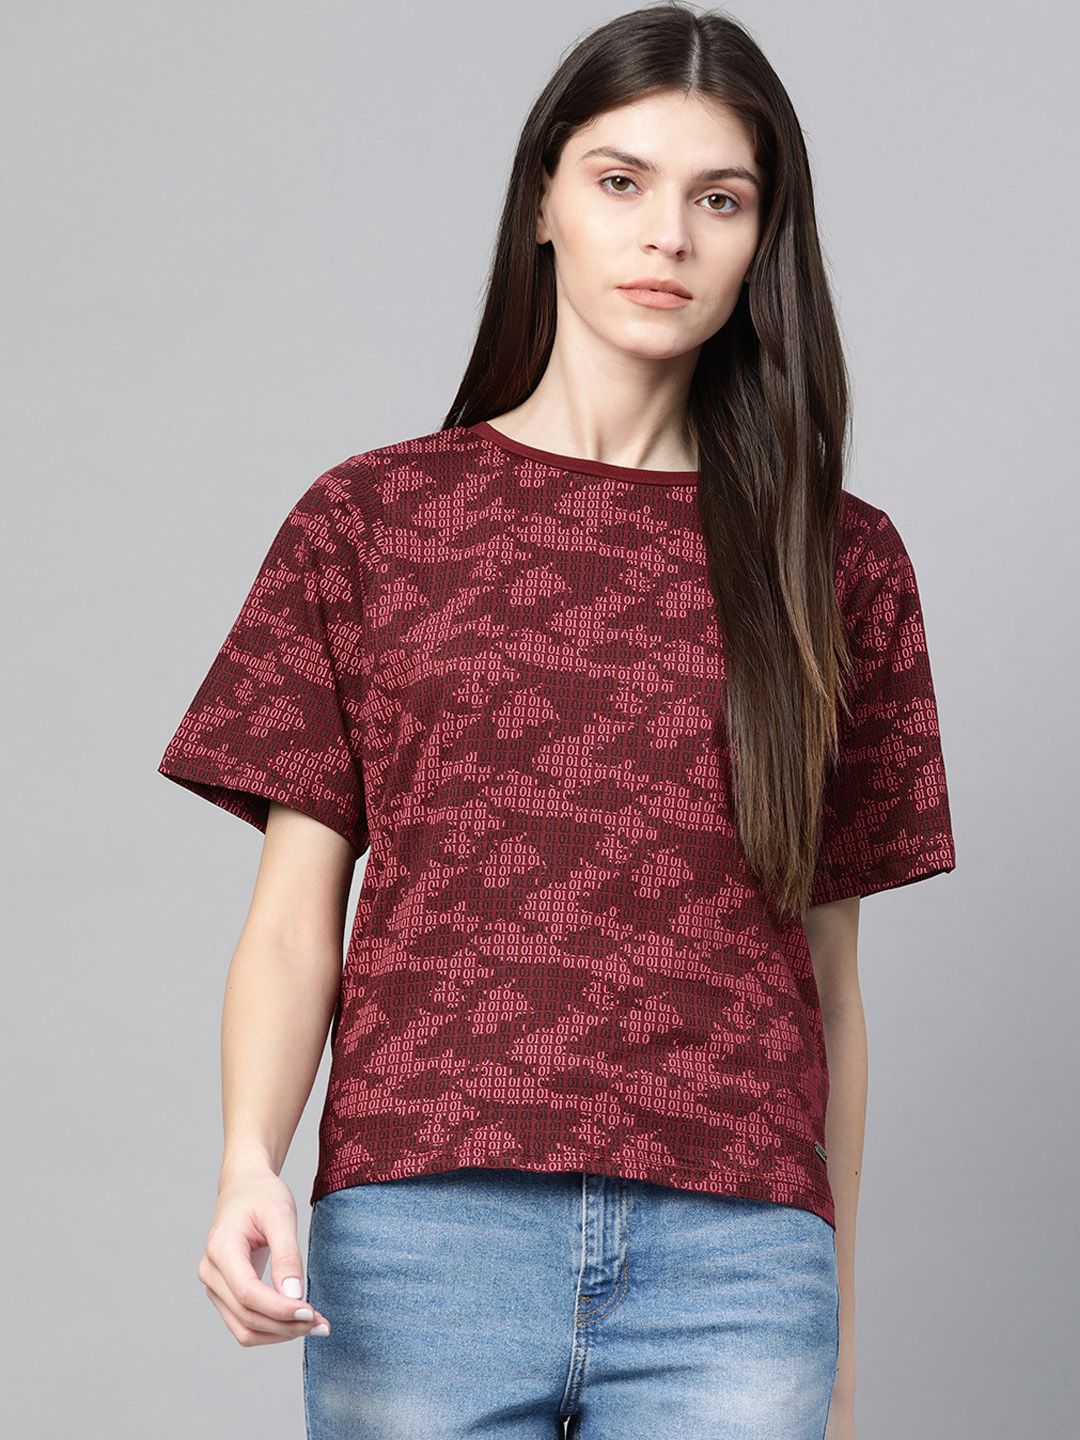 Roadster Women Burgundy & Black Printed Styled Back Pure Cotton Top